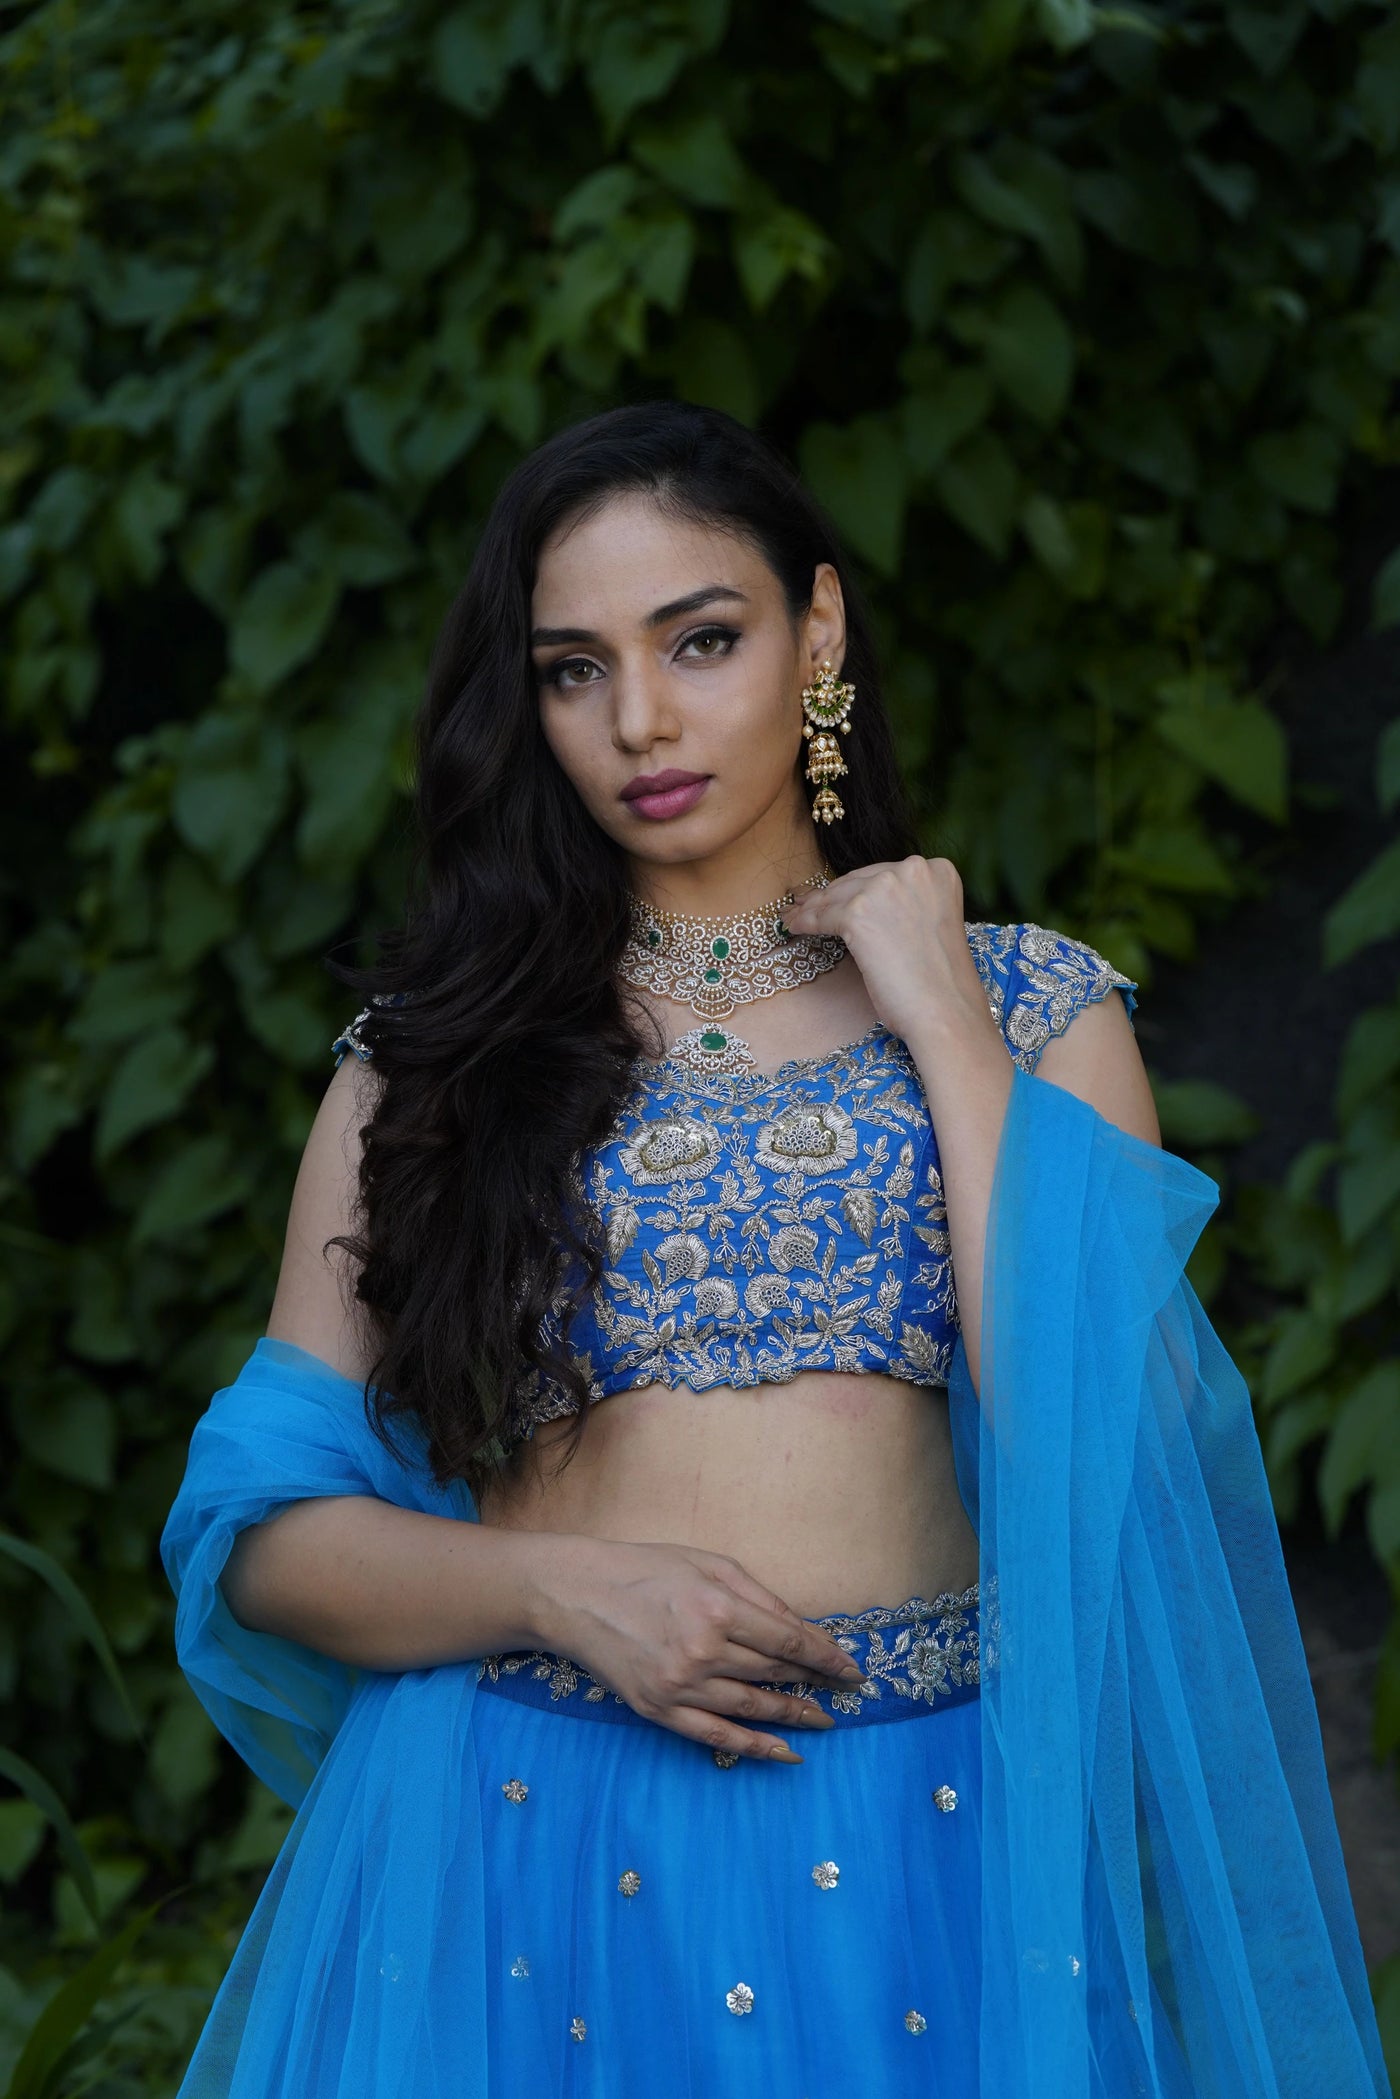 Blue Raw Silk Lehenga Set Indian Clothing in Denver, CO, Aurora, CO, Boulder, CO, Fort Collins, CO, Colorado Springs, CO, Parker, CO, Highlands Ranch, CO, Cherry Creek, CO, Centennial, CO, and Longmont, CO. NATIONWIDE SHIPPING USA- India Fashion X